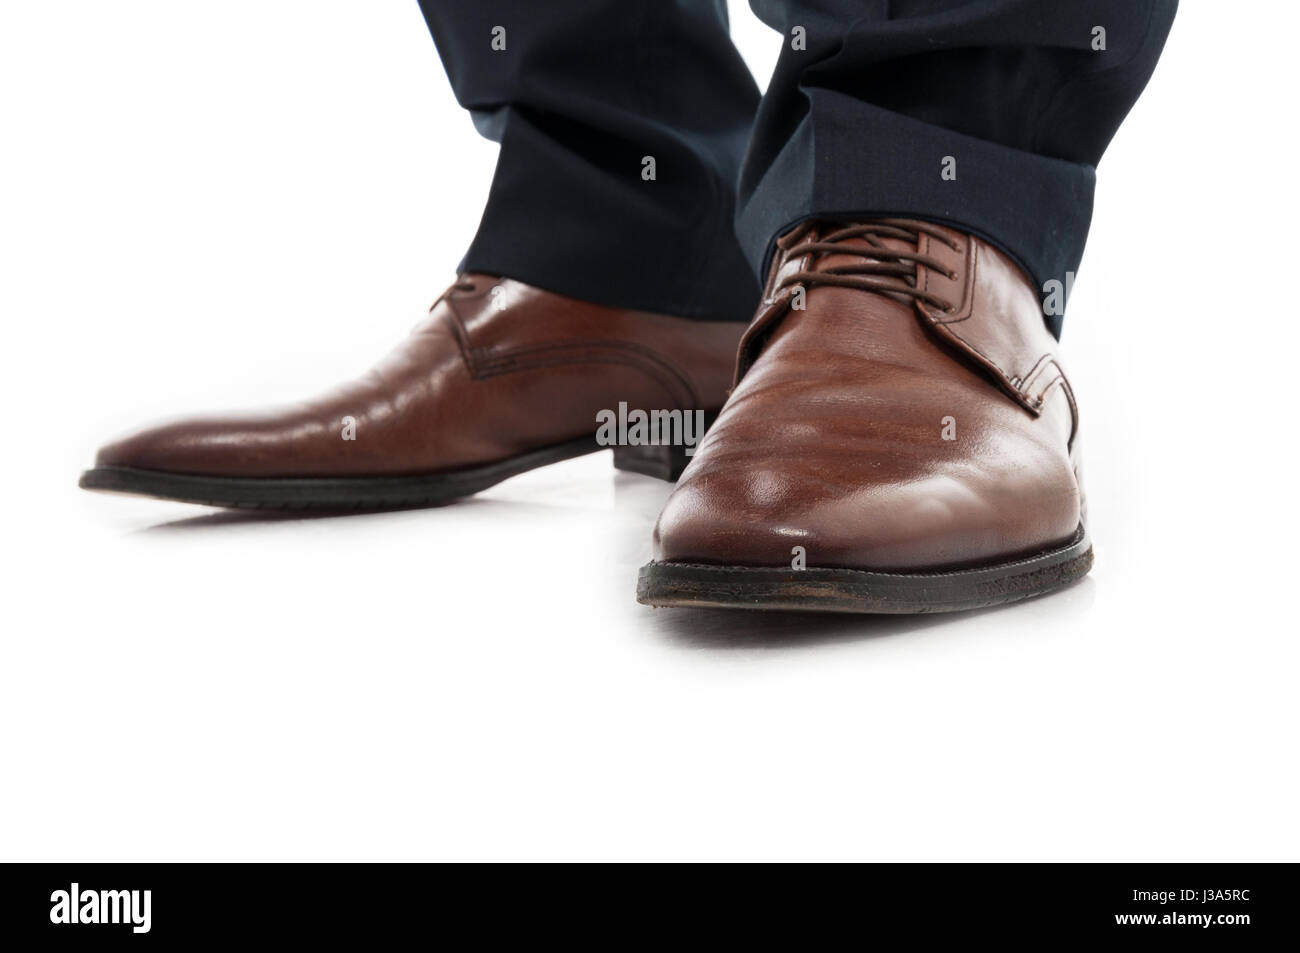 dress shoes for standing